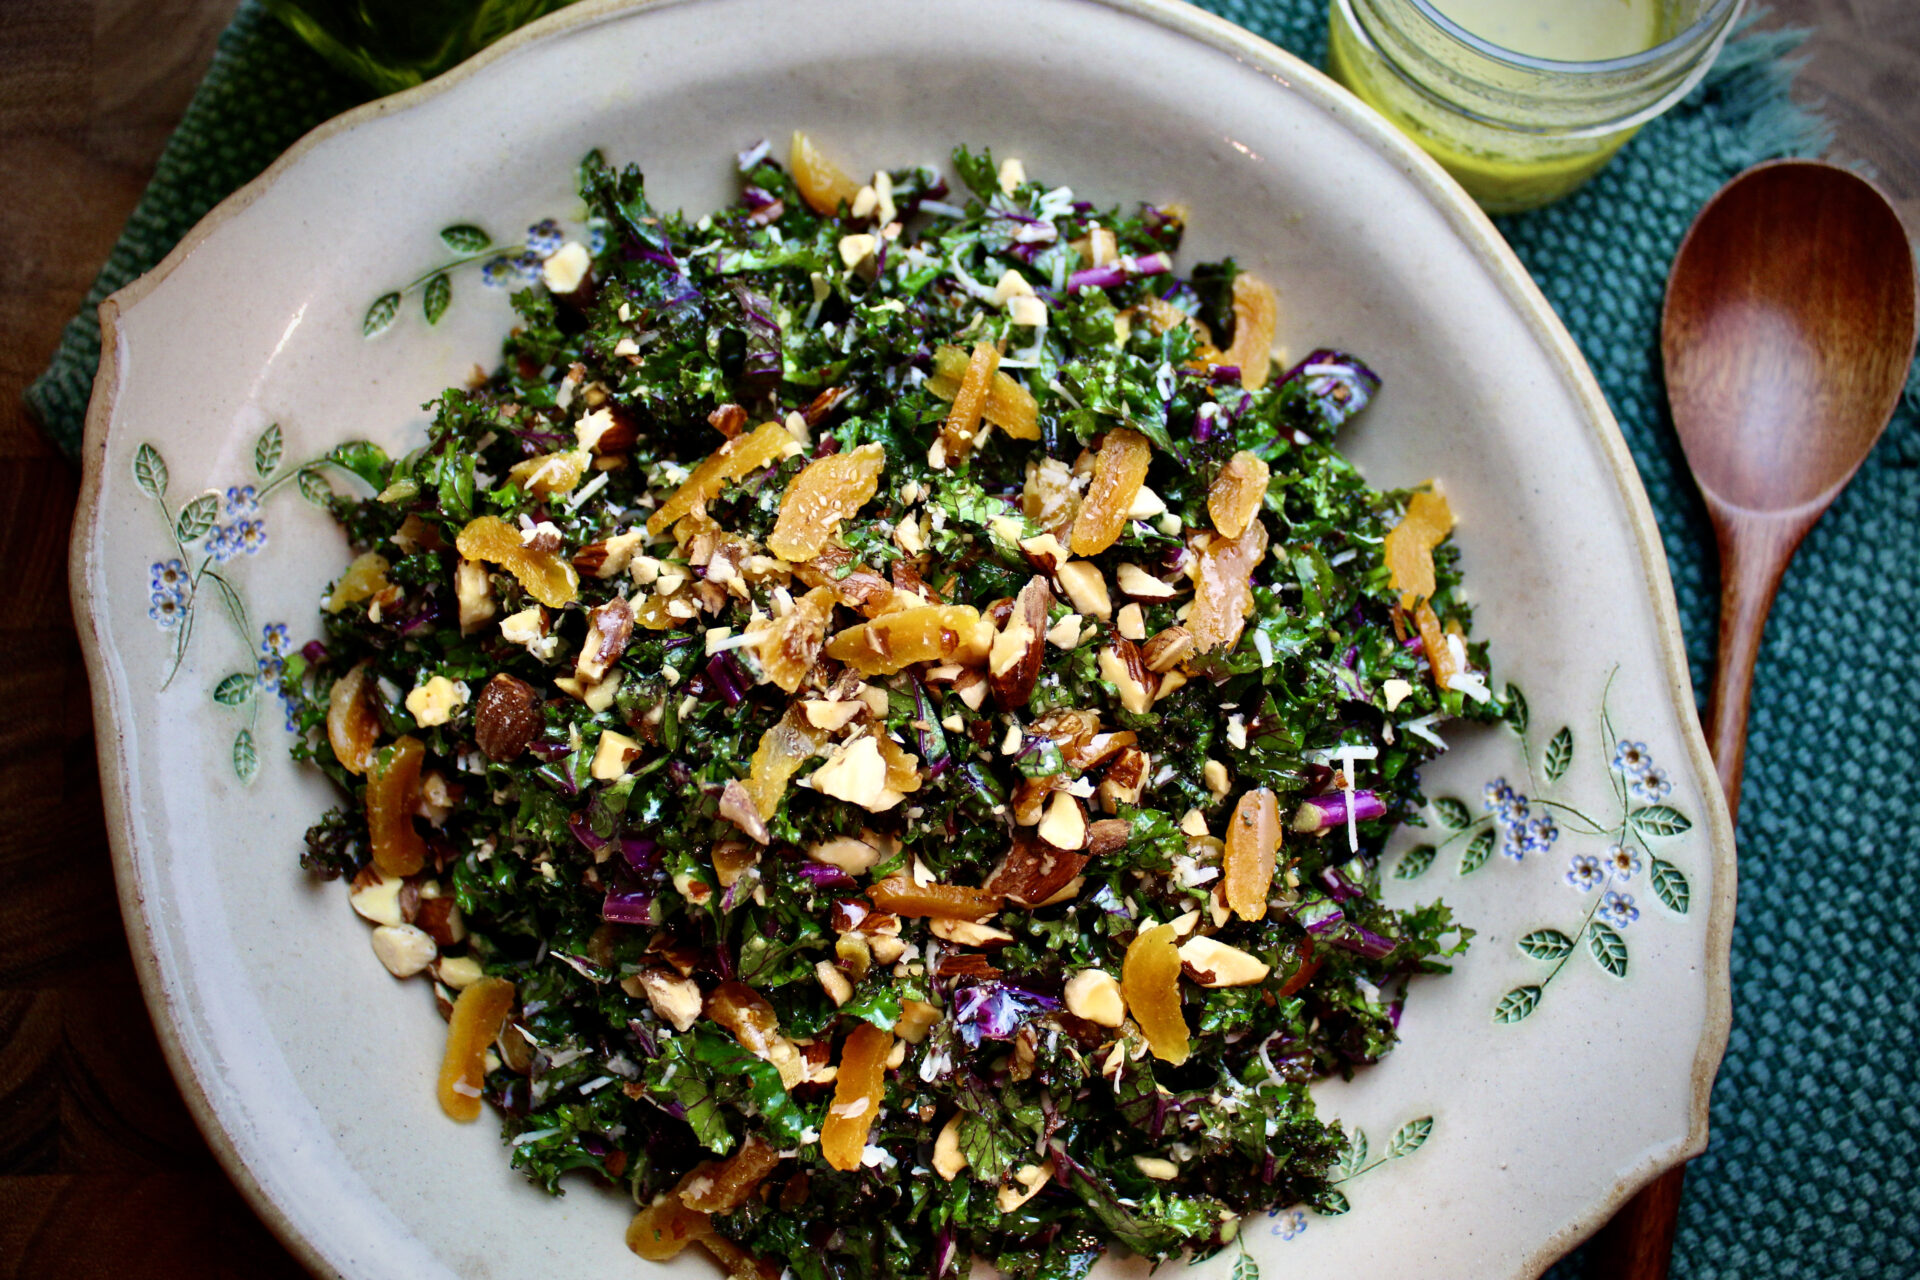 Learn how to make this tasty kale salad with dried apricots, almonds, and cheese. Dressed with a shallot vinaigrette.